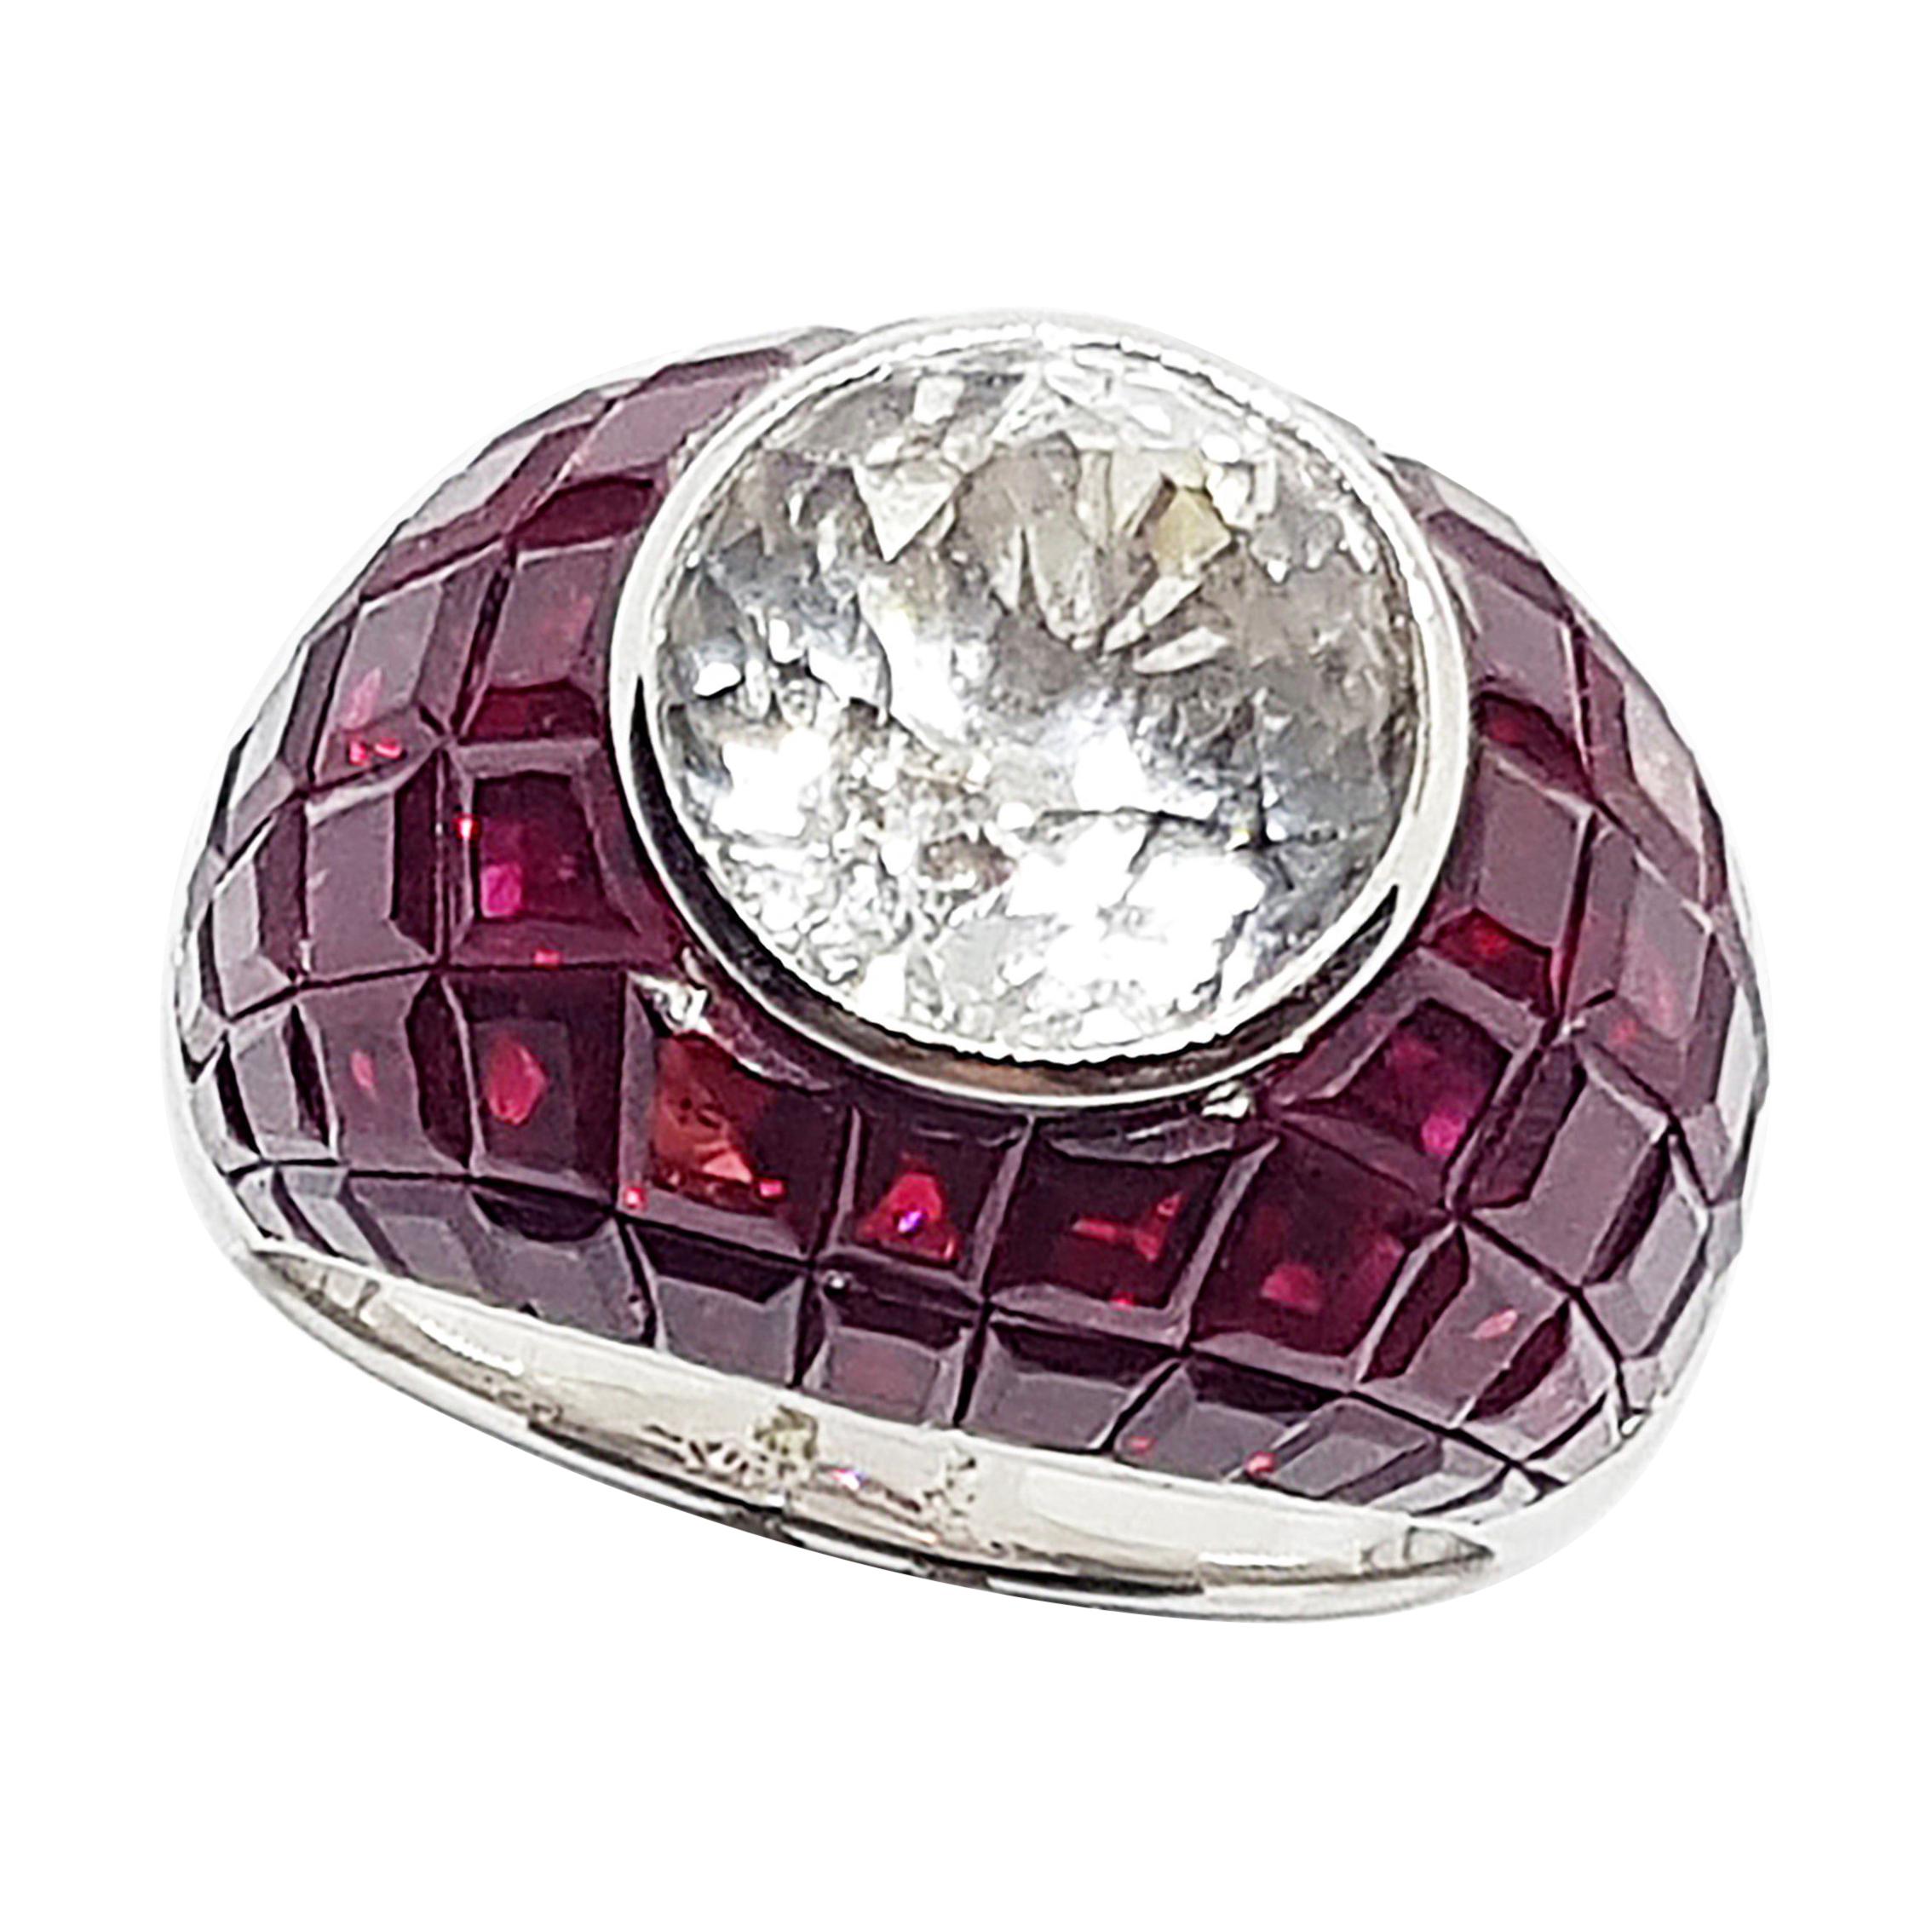 White Sapphire with Ruby Ring Set in 18 Karat White Gold Settings